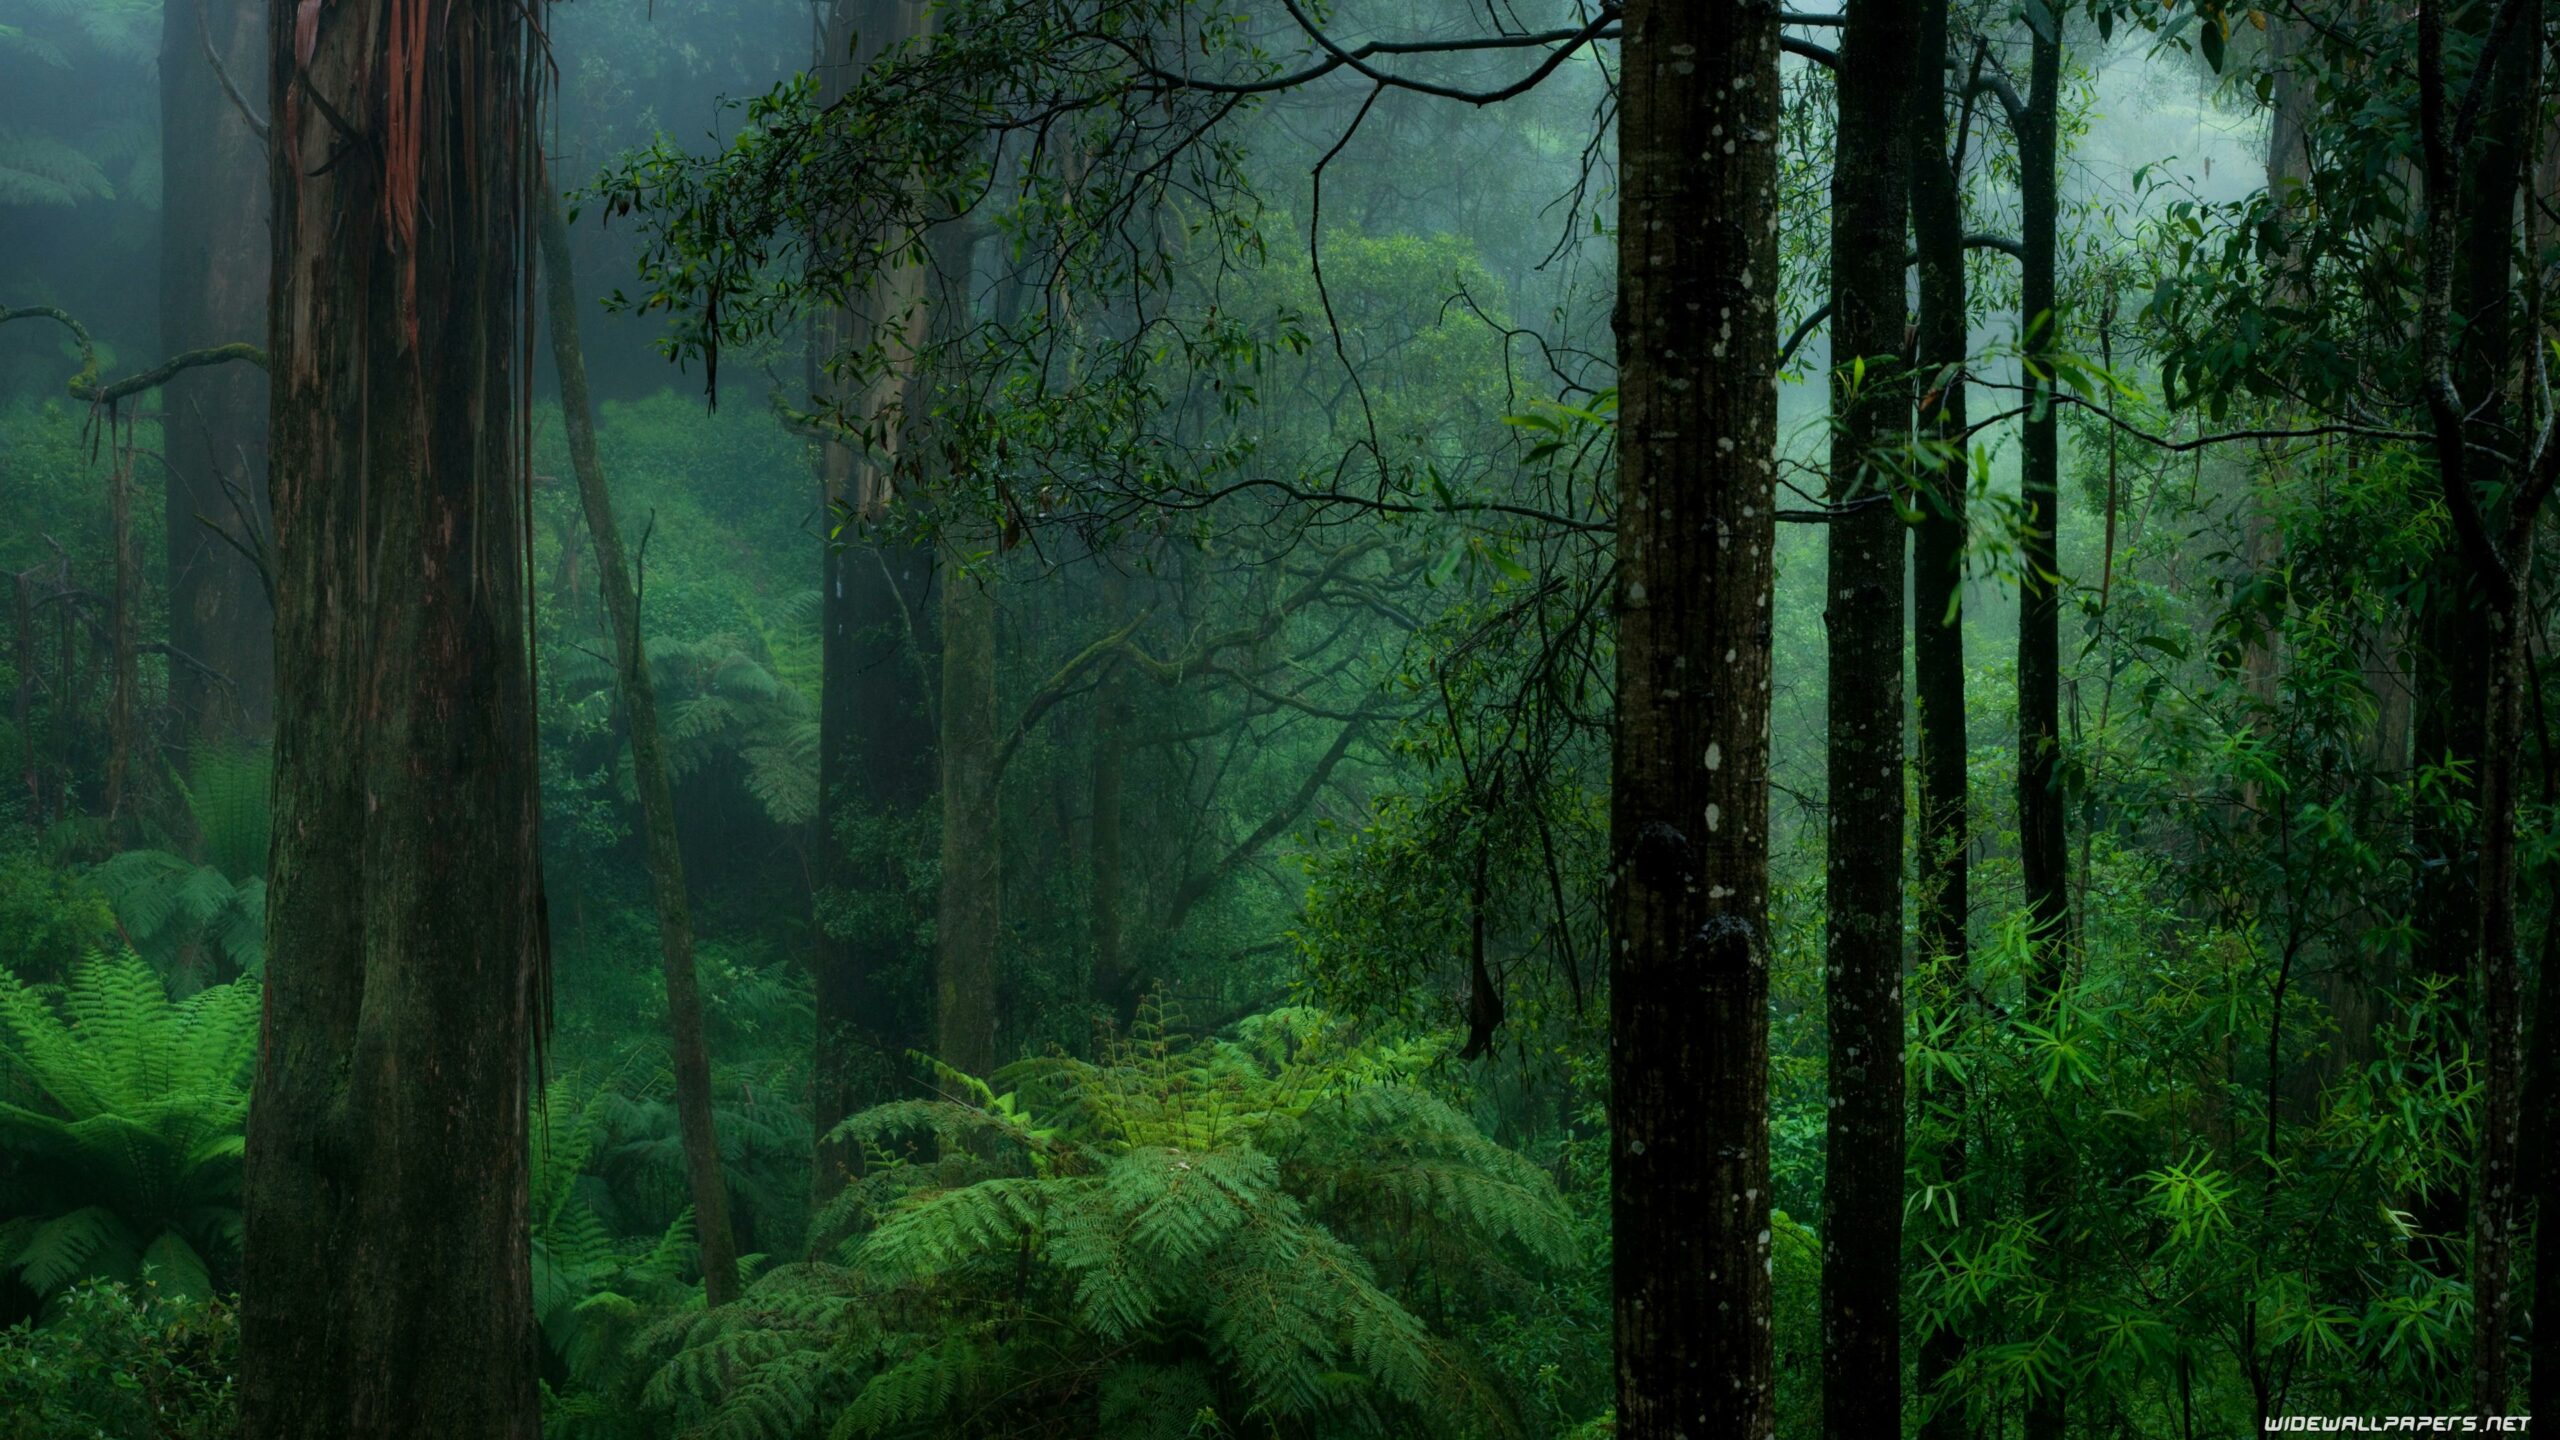 Raining Forest Wallpapers - Top Free Raining Forest Backgrounds